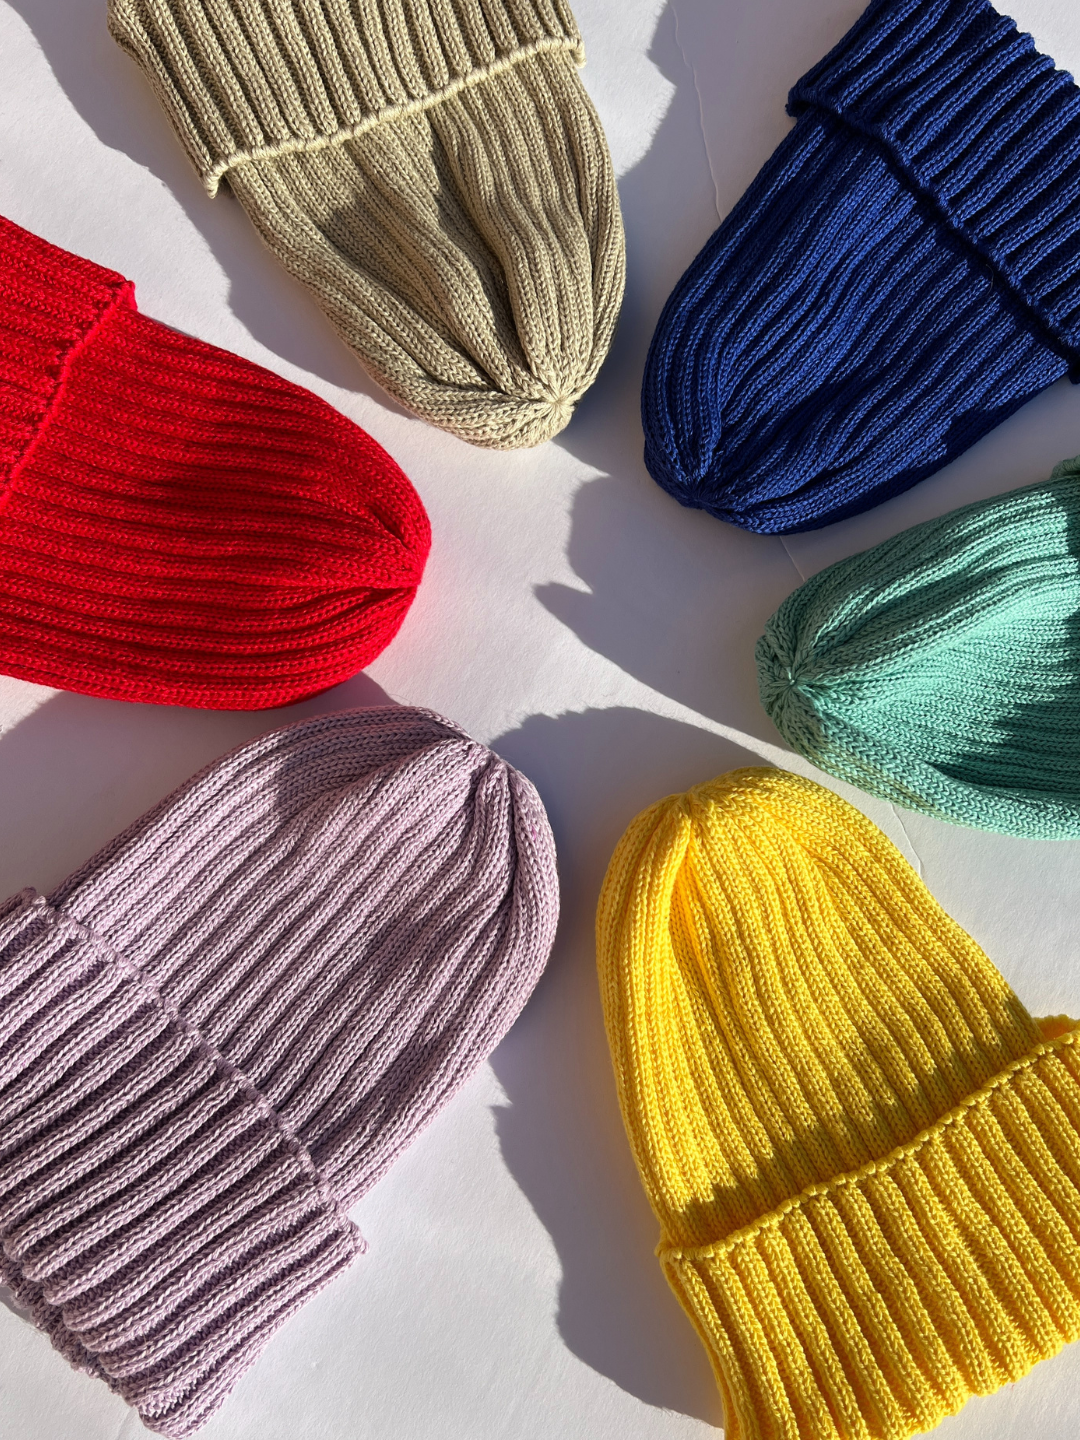 Group of lilac, red, khaki, blue, mint and yellow baby beanies on a white background.